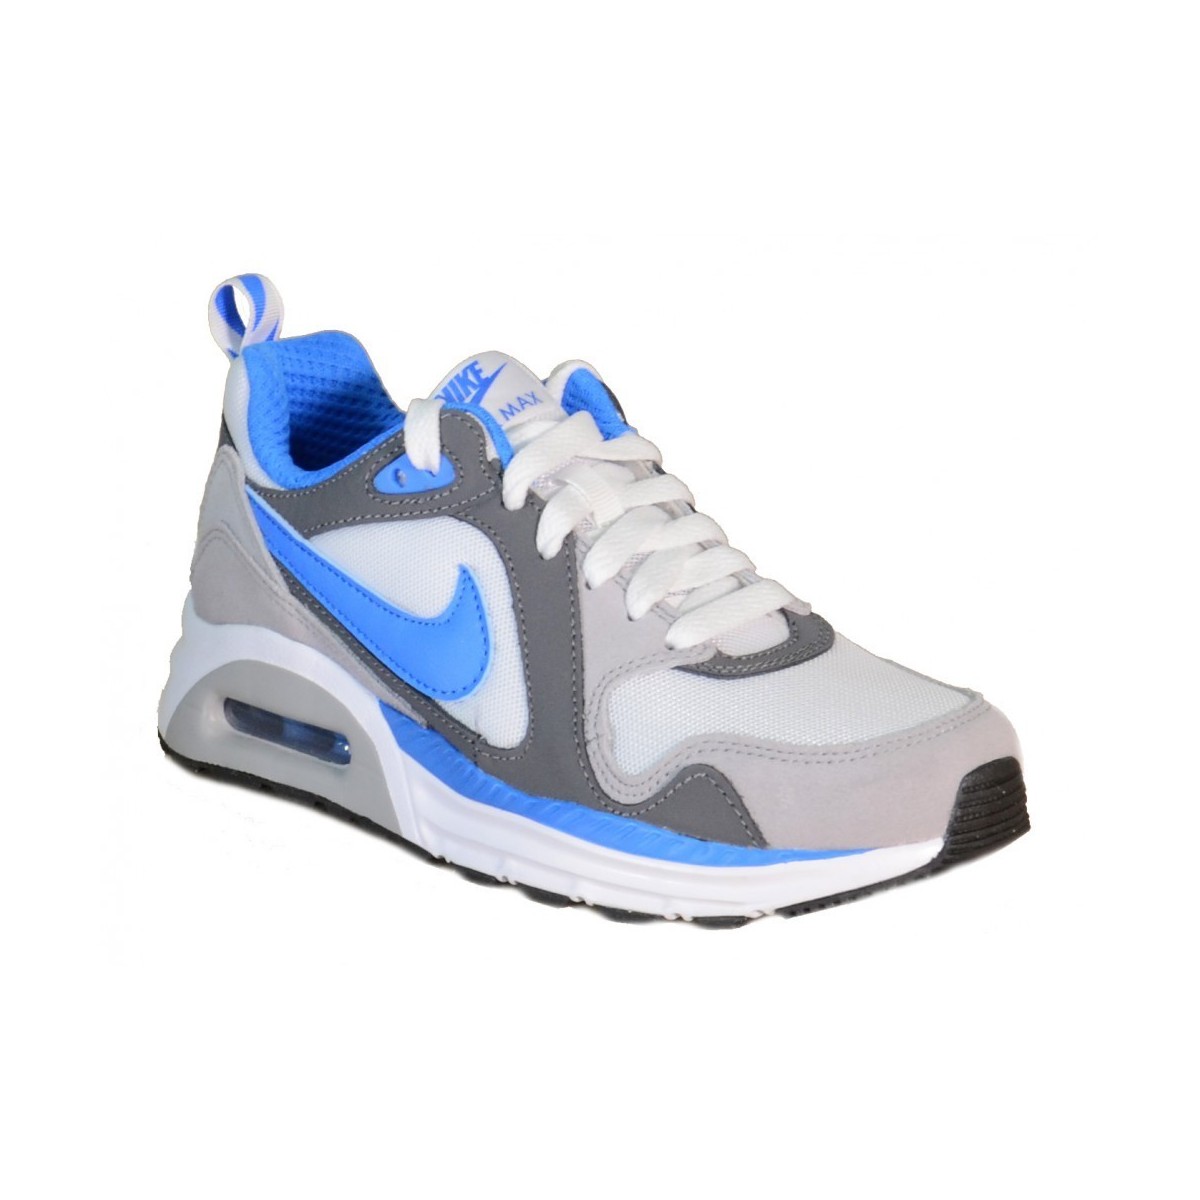 Suri Bloedbad thee Footwear Nike Air Max Trax GS 644453 color white/pht blue-wlf gry-drk gry  shoes